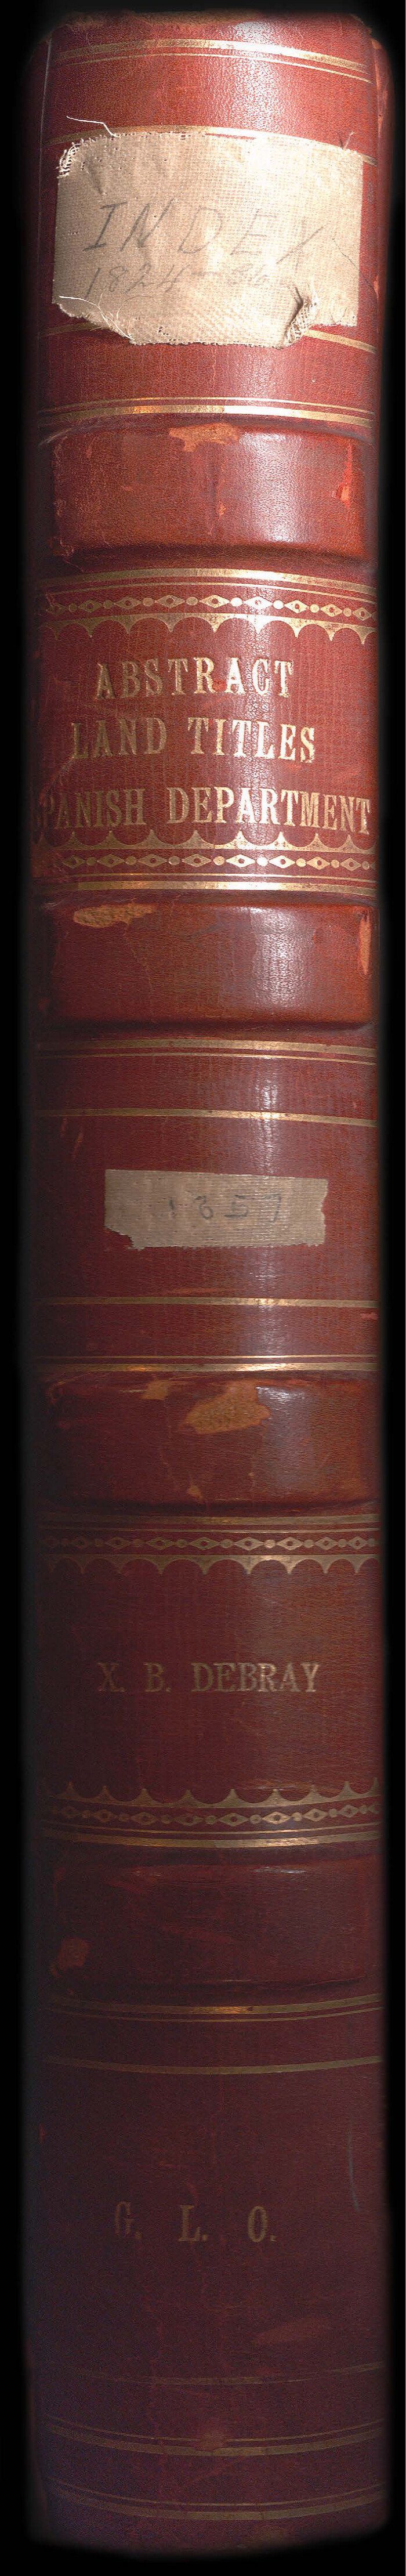 94535, Abstract of Land Titles in the Spanish Department of the General Land Office of the State of Texas - 1824-36, Historical Volumes